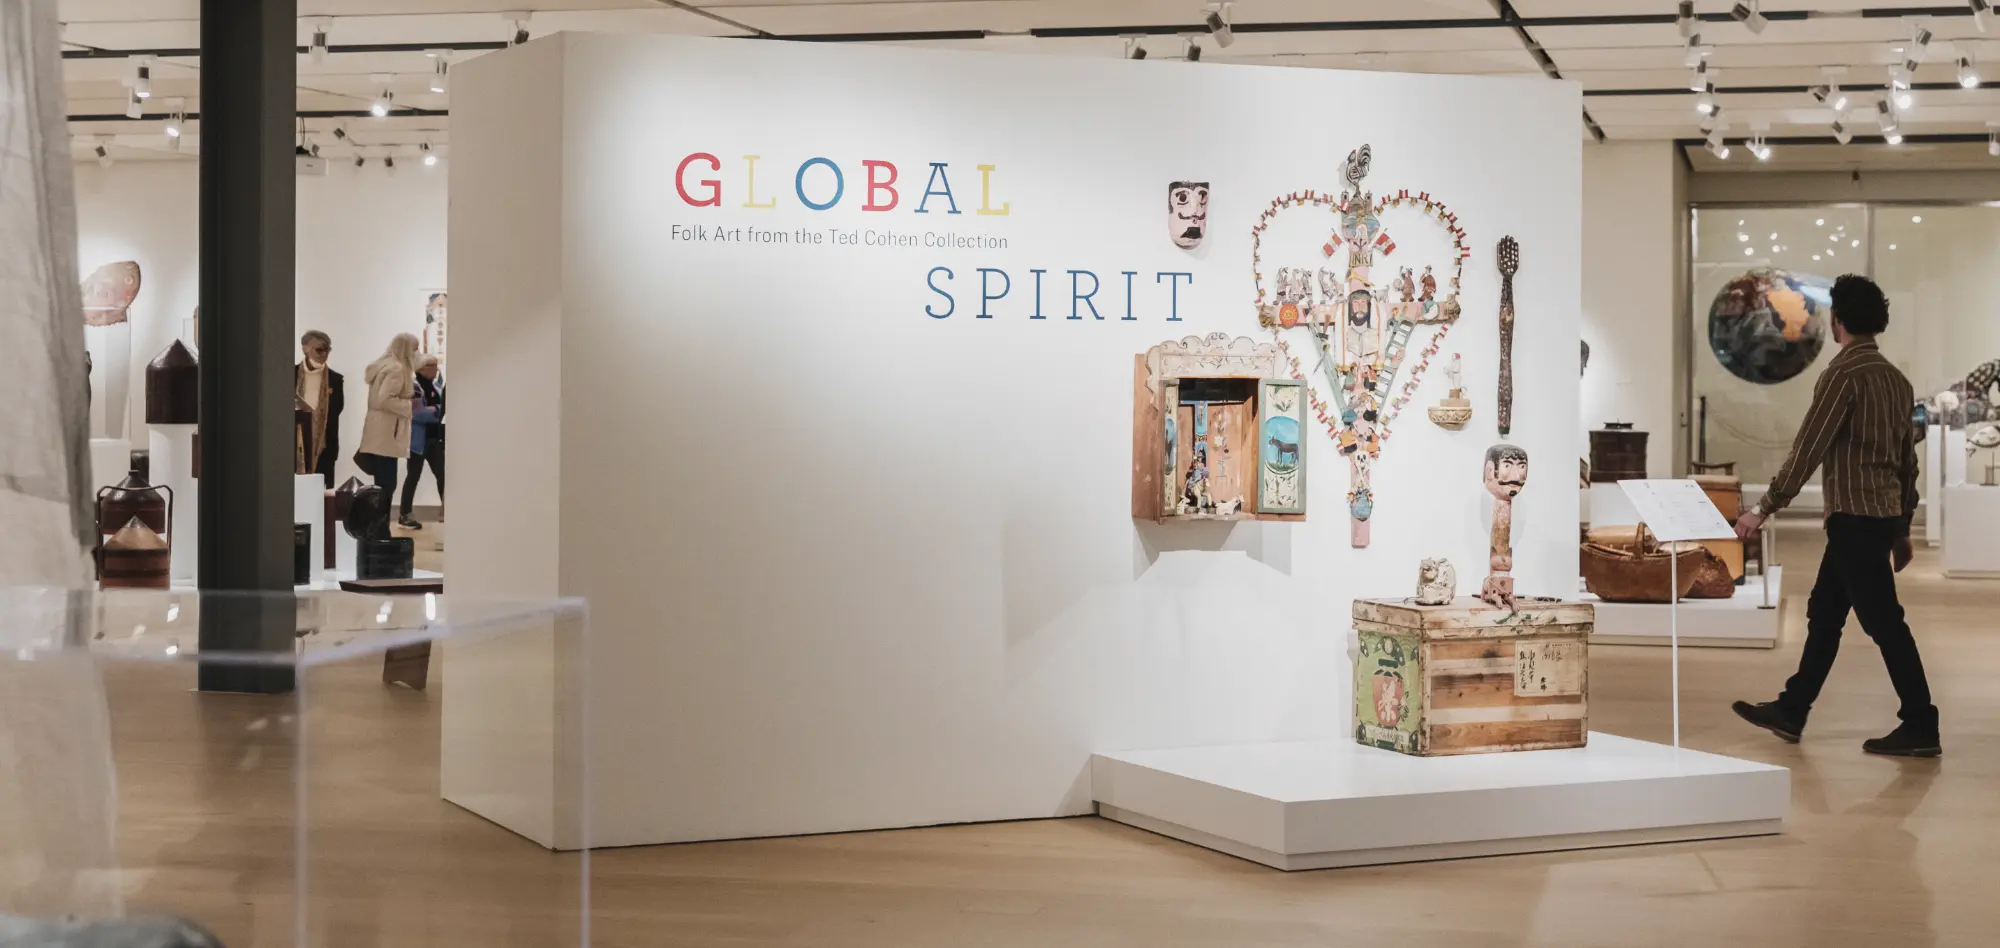 A display of the Global Spirit exhibition at the Mingei Museum. An adult visitor with short brown hair can be seen walking through the exhibit space.